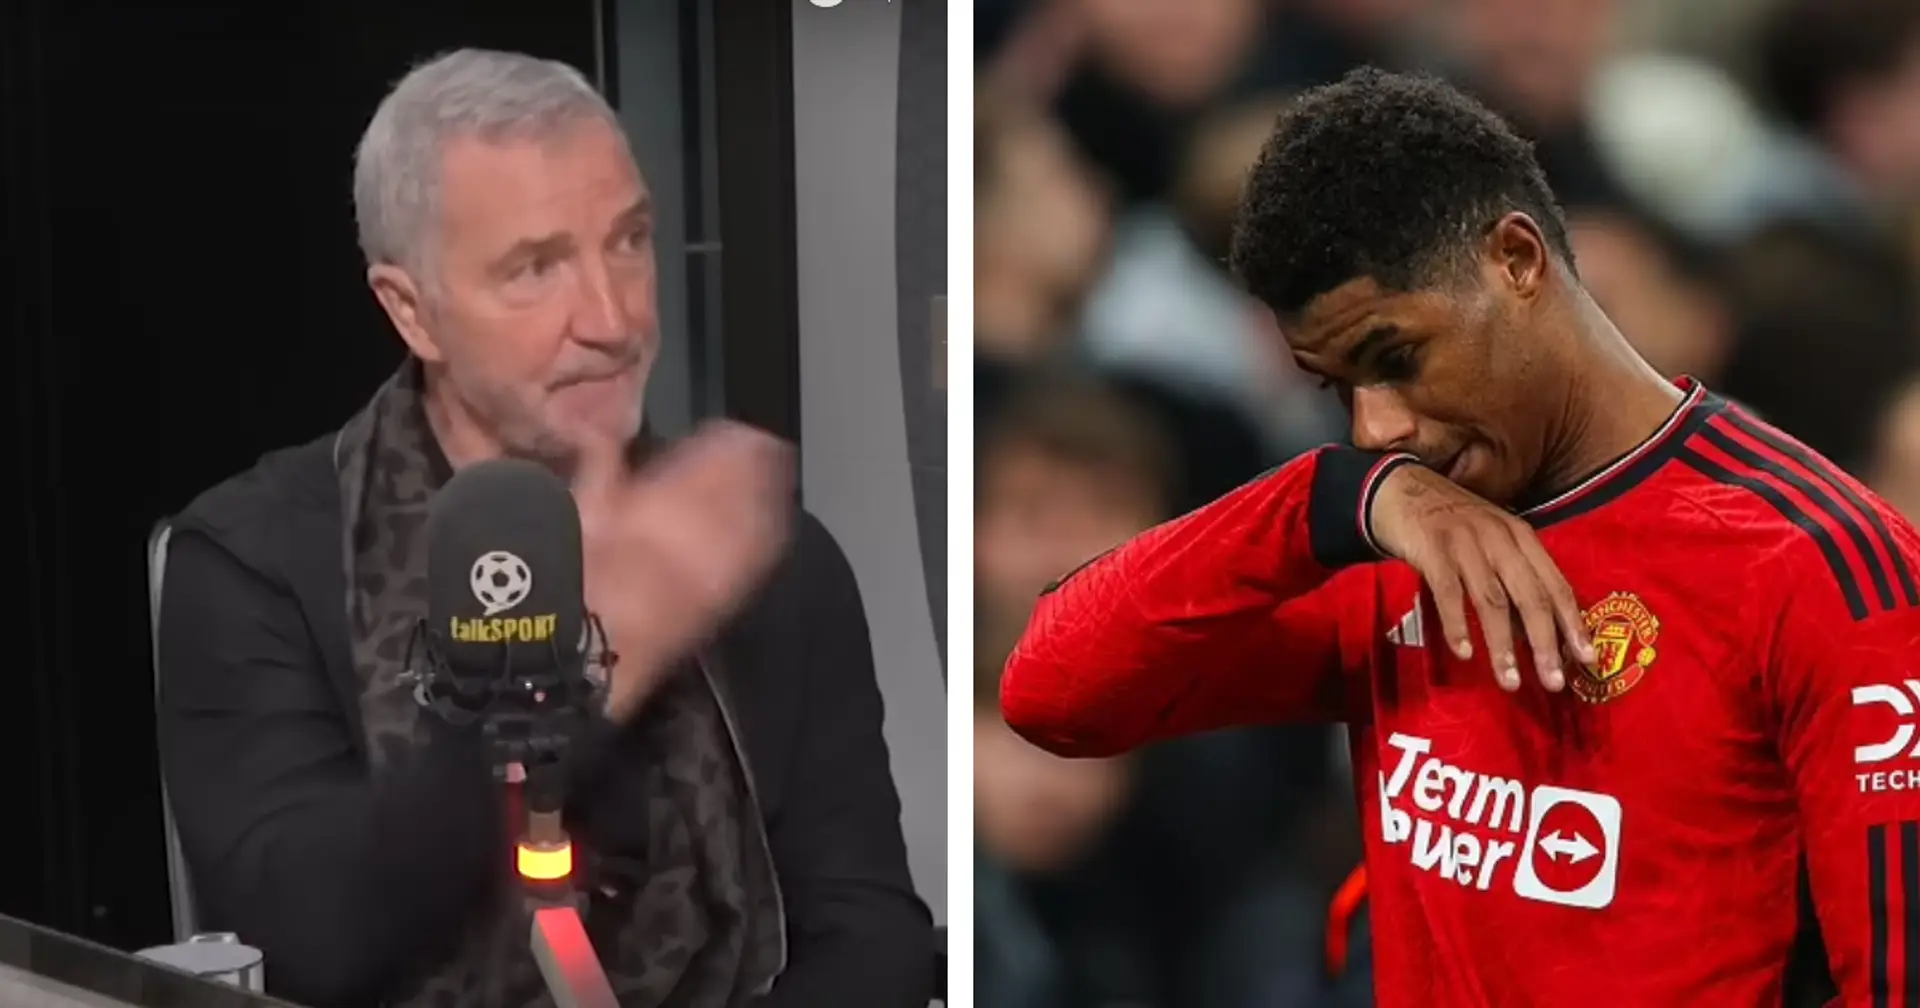 'The village idiot': Graeme Souness can't stop talking about Man United — Rashford is his new target